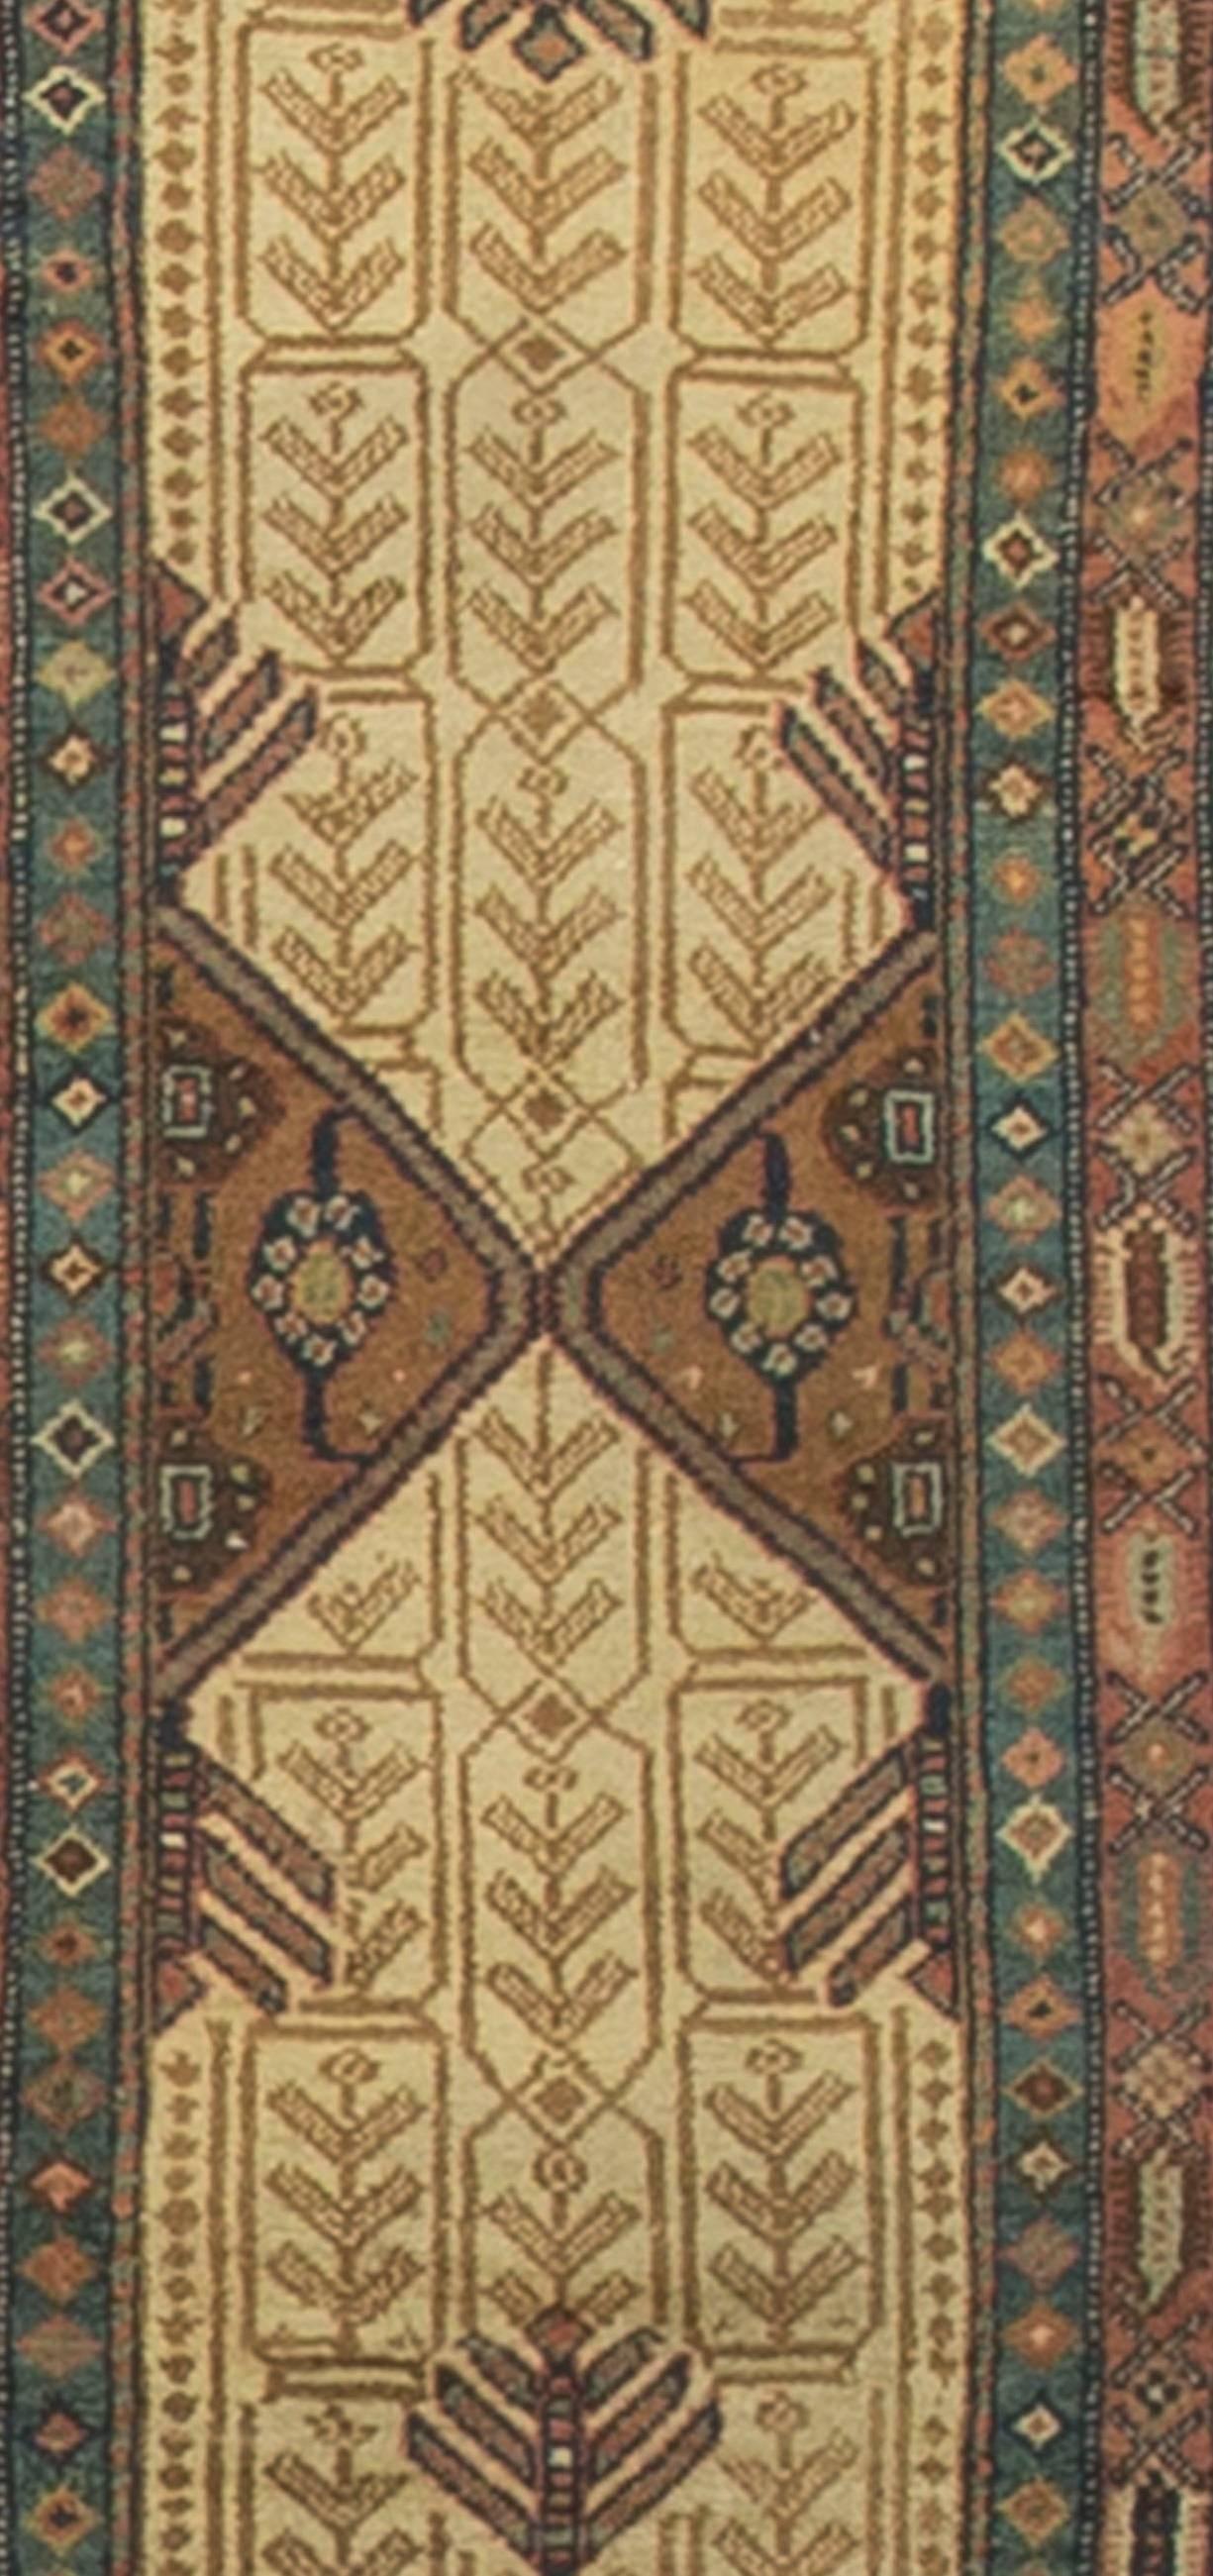 Antique Persian Camel hair Serab runner, circa 1900. This rug is woven using camel hair which is strong and resilient. Camel hair rugs are not the typical and are rare to find. They were woven in a handful of tribal area including Serab where this